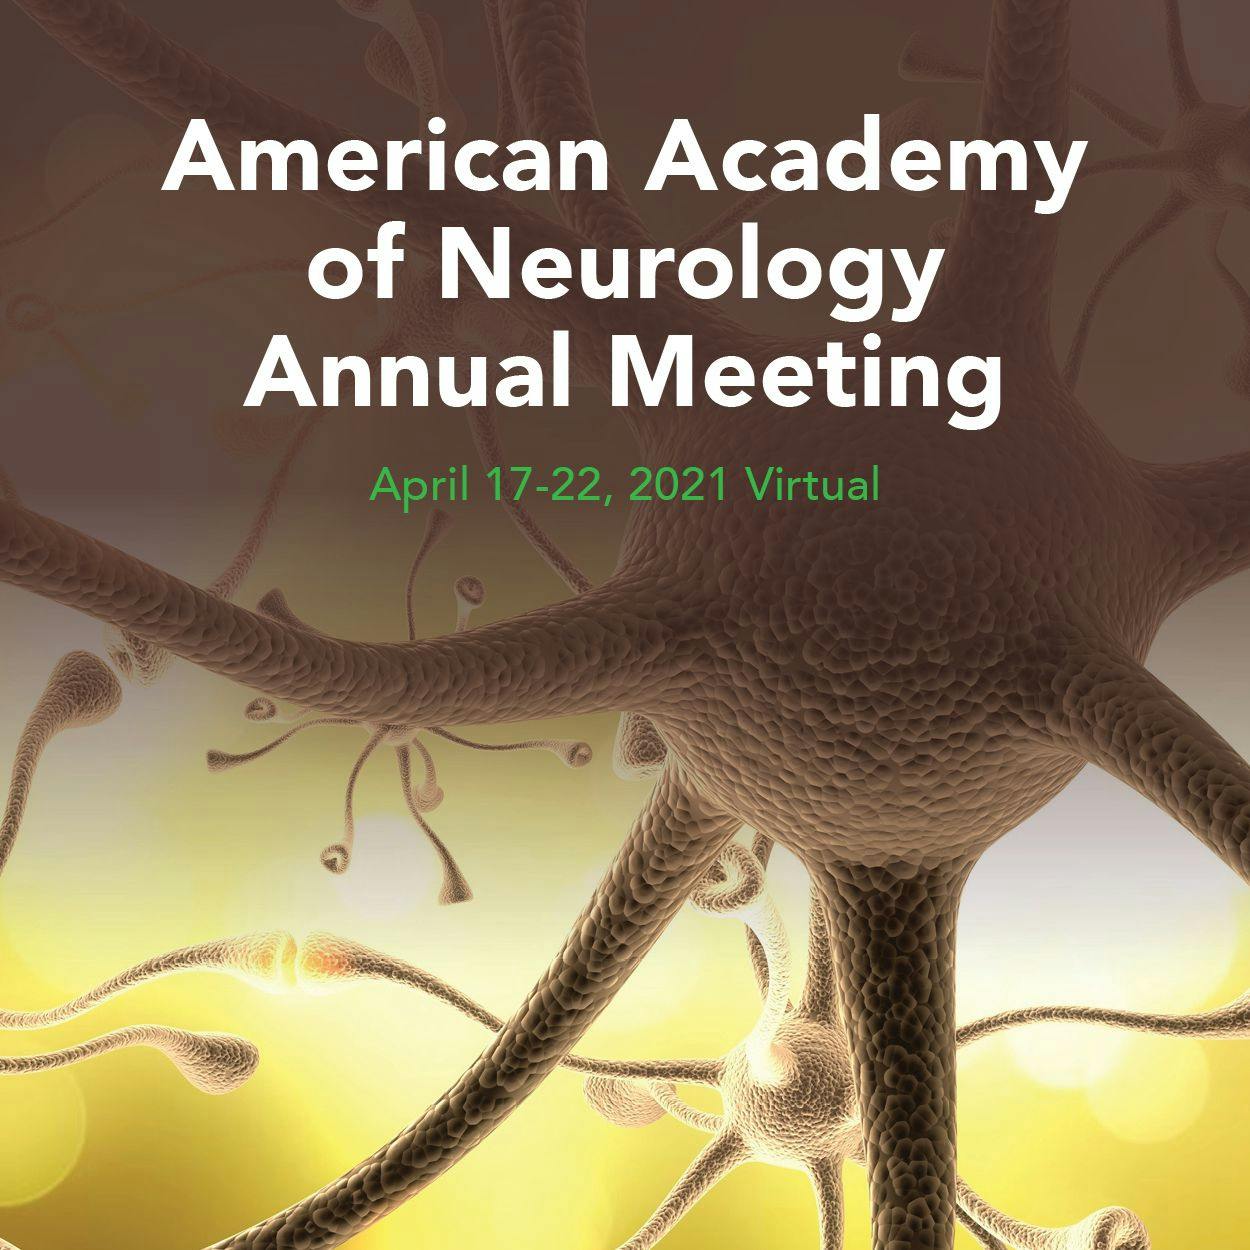 What to Expect from the 2021 American Academy of Neurology Annual Meeting